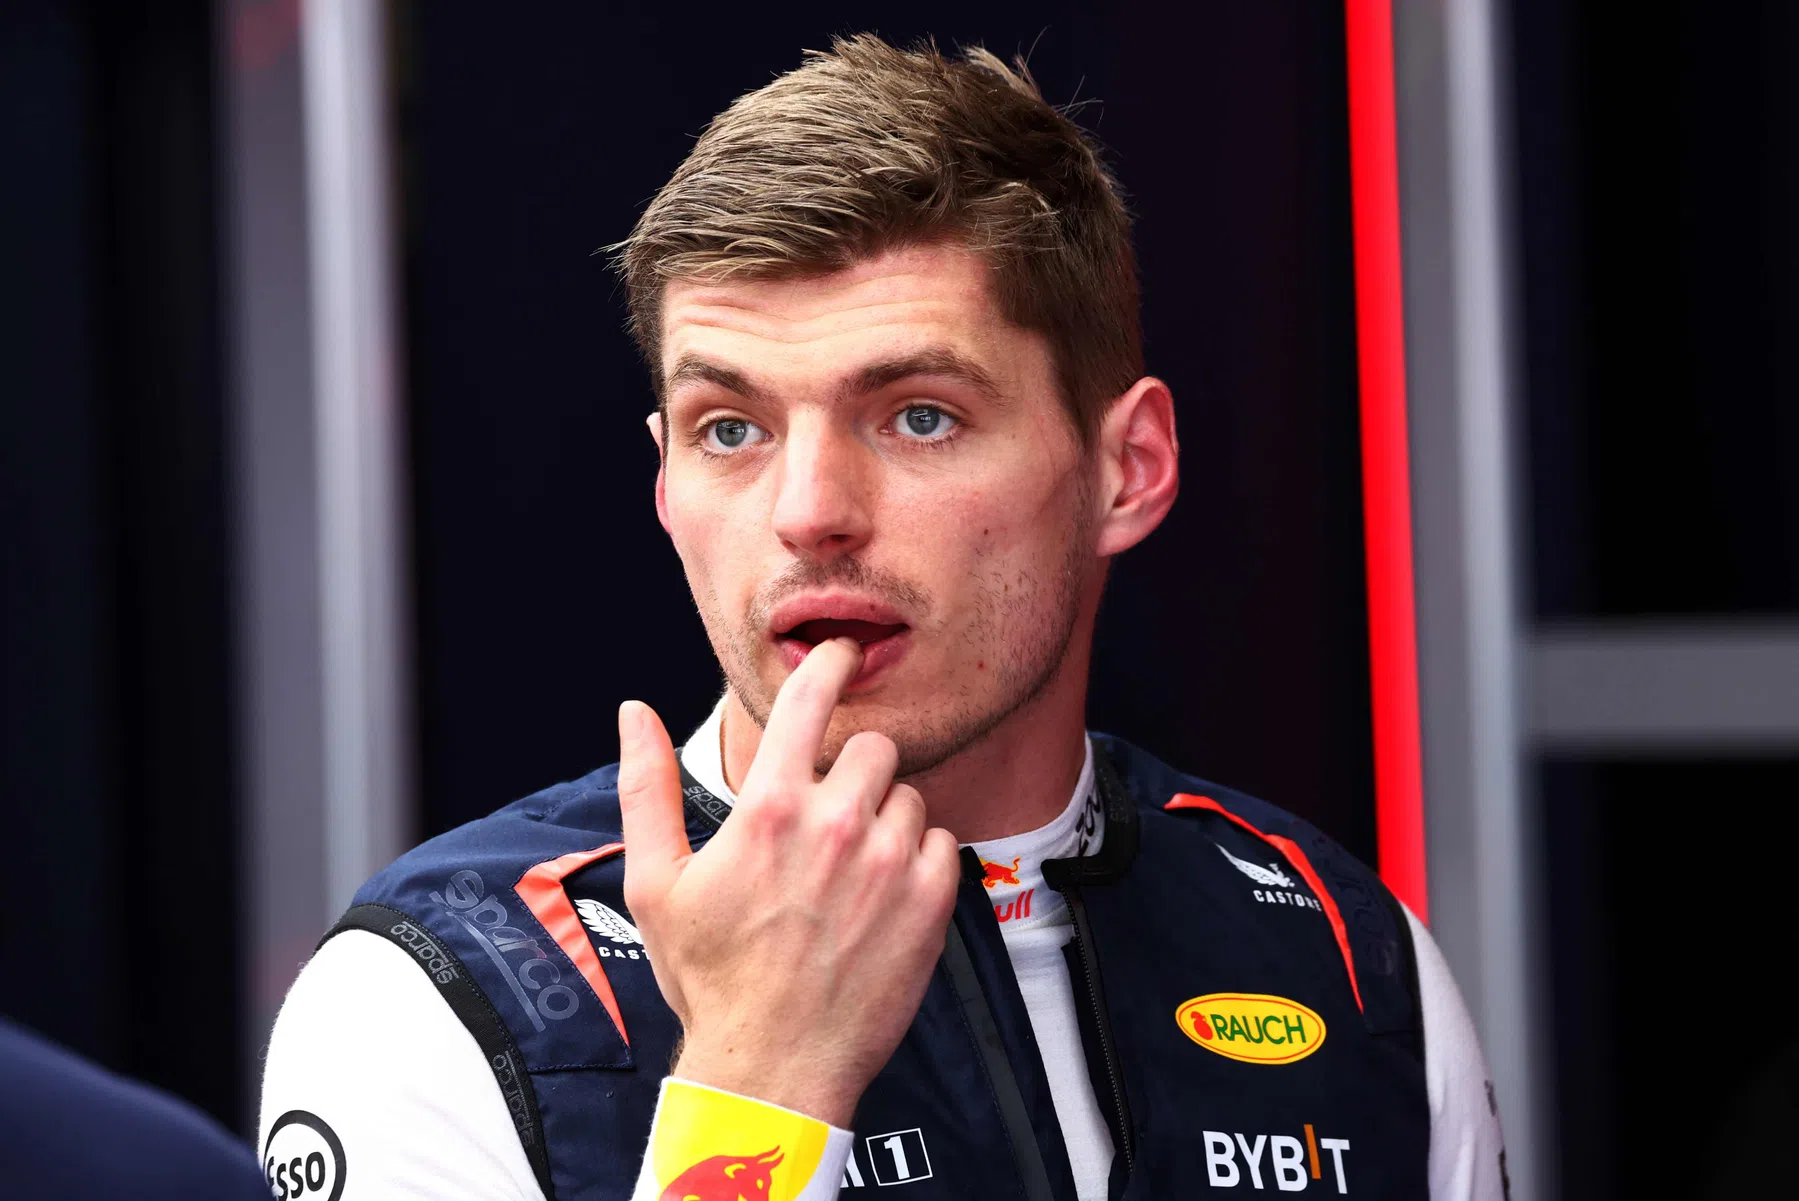 Max Verstappen had little grip on track in Canada